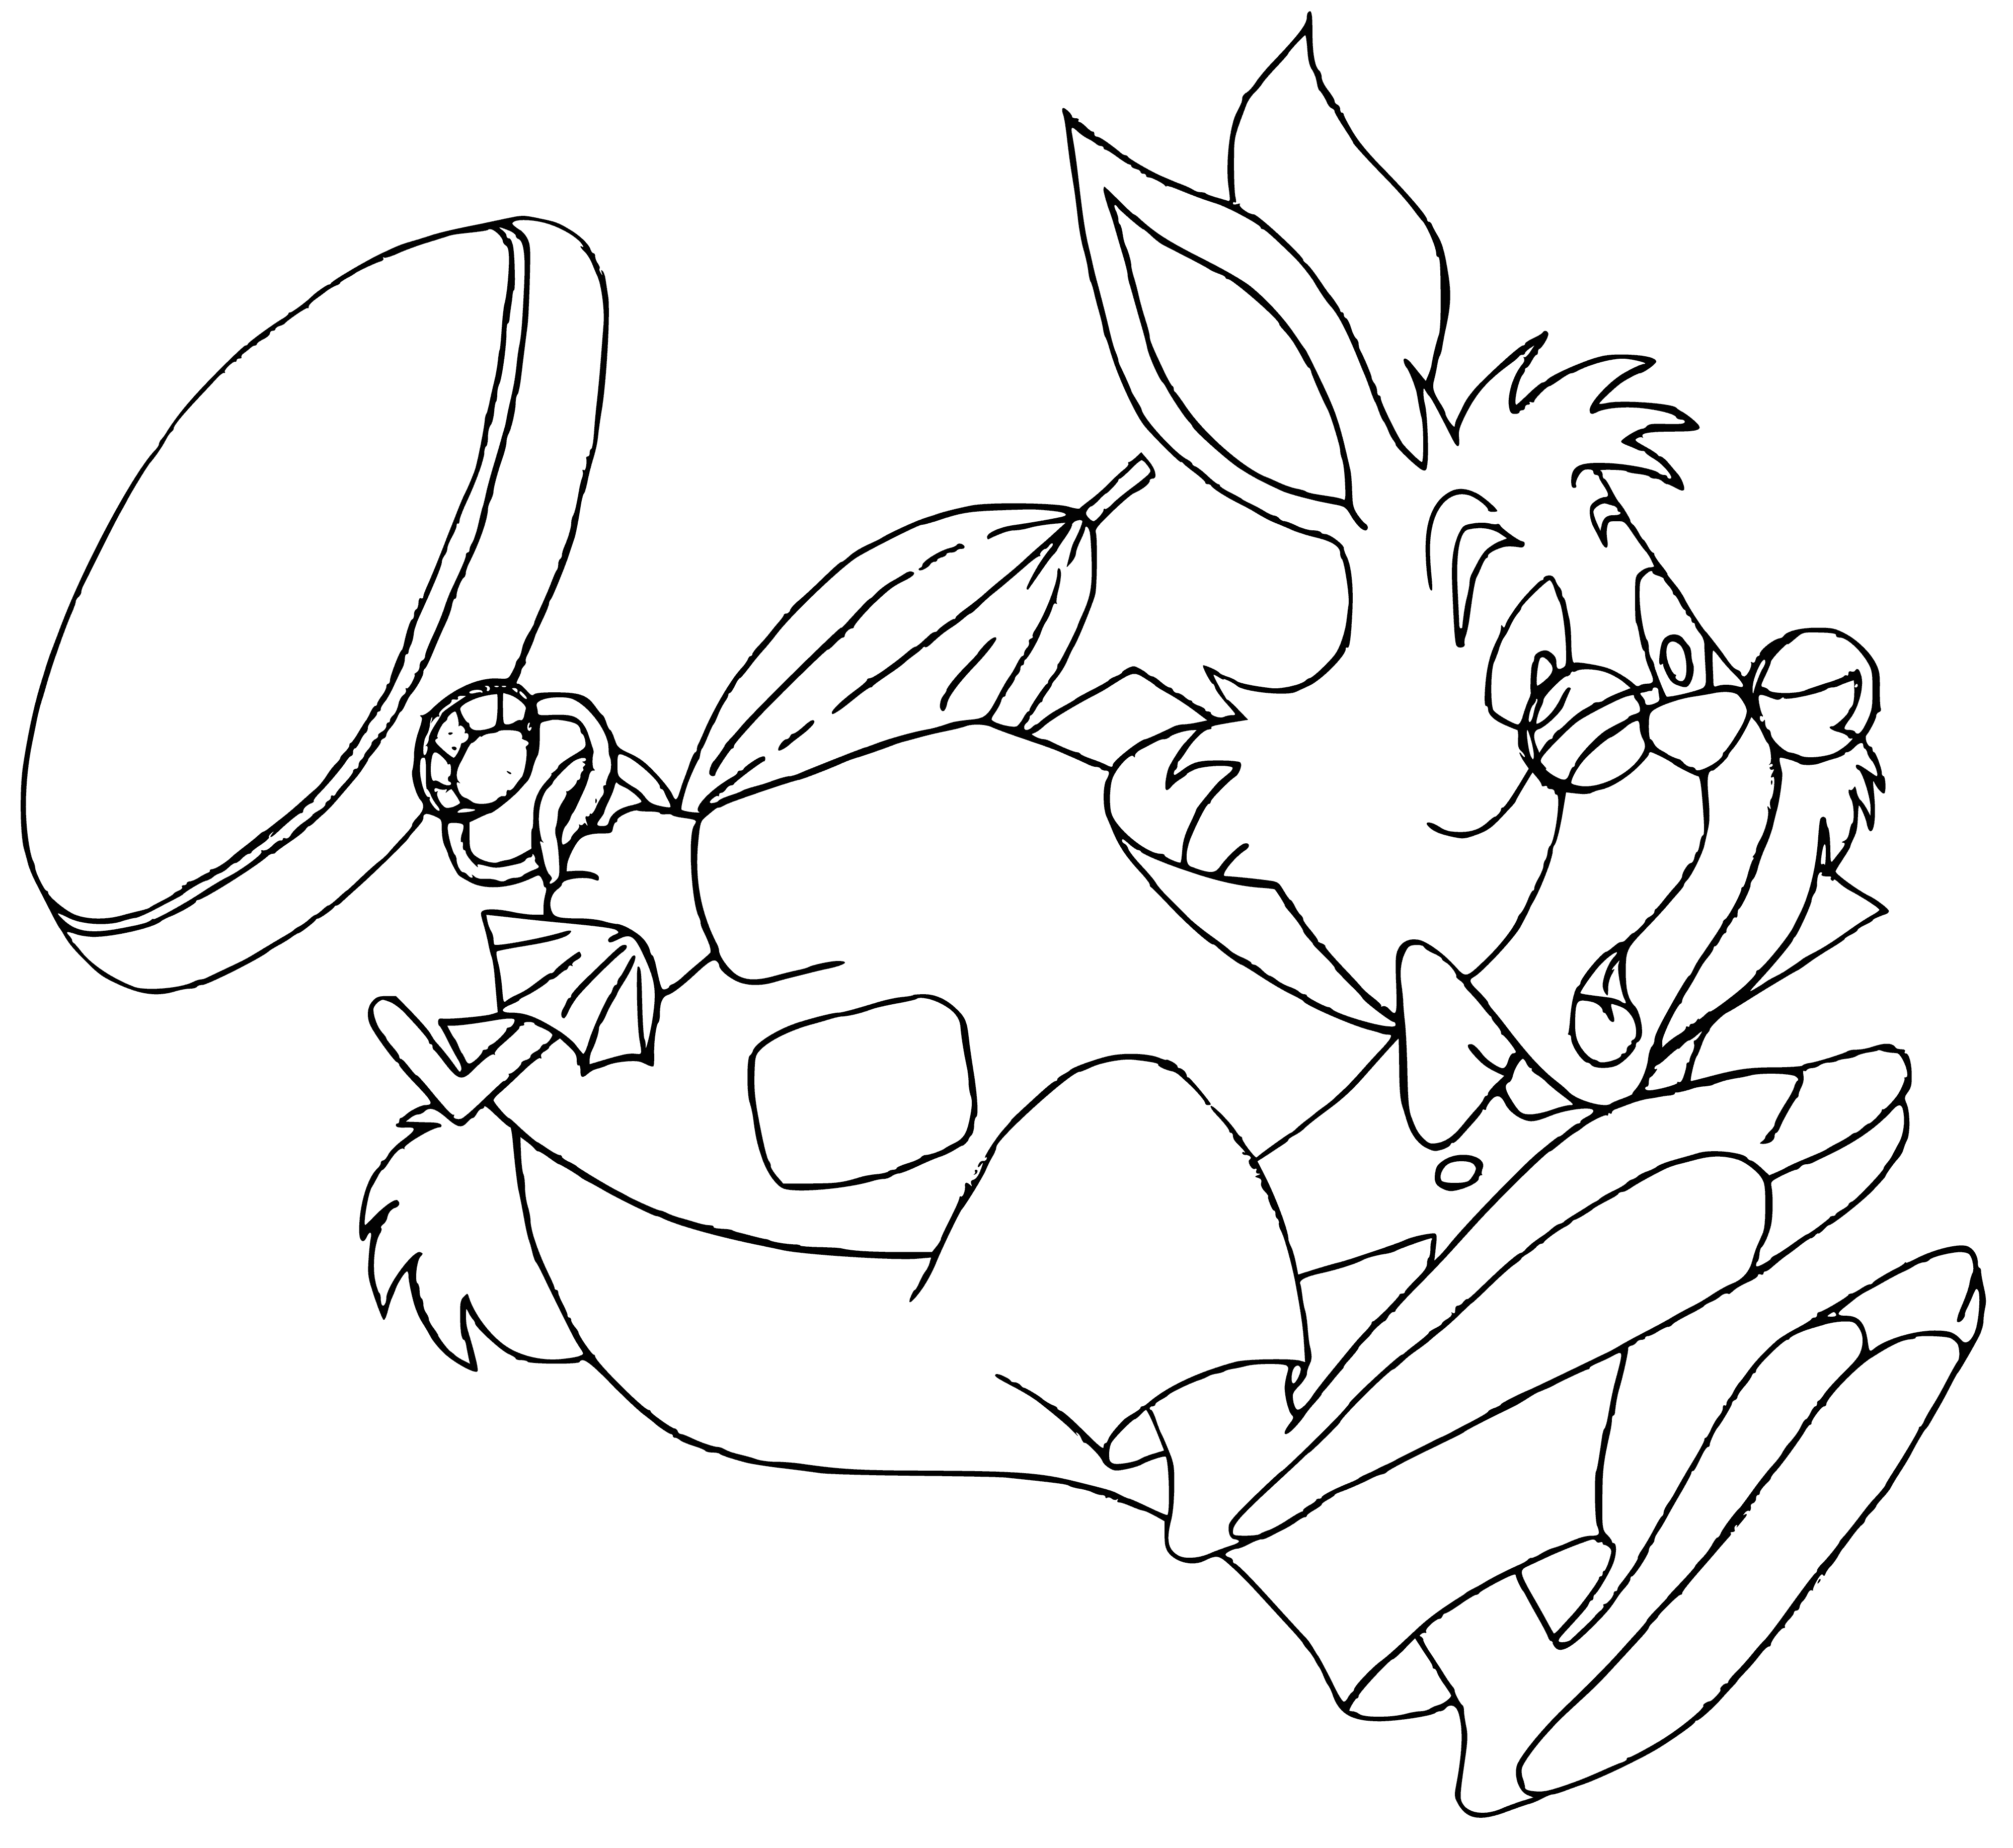 coloring page: Rabbit nervously looks over shoulder, clutching pocket watch in one hand.